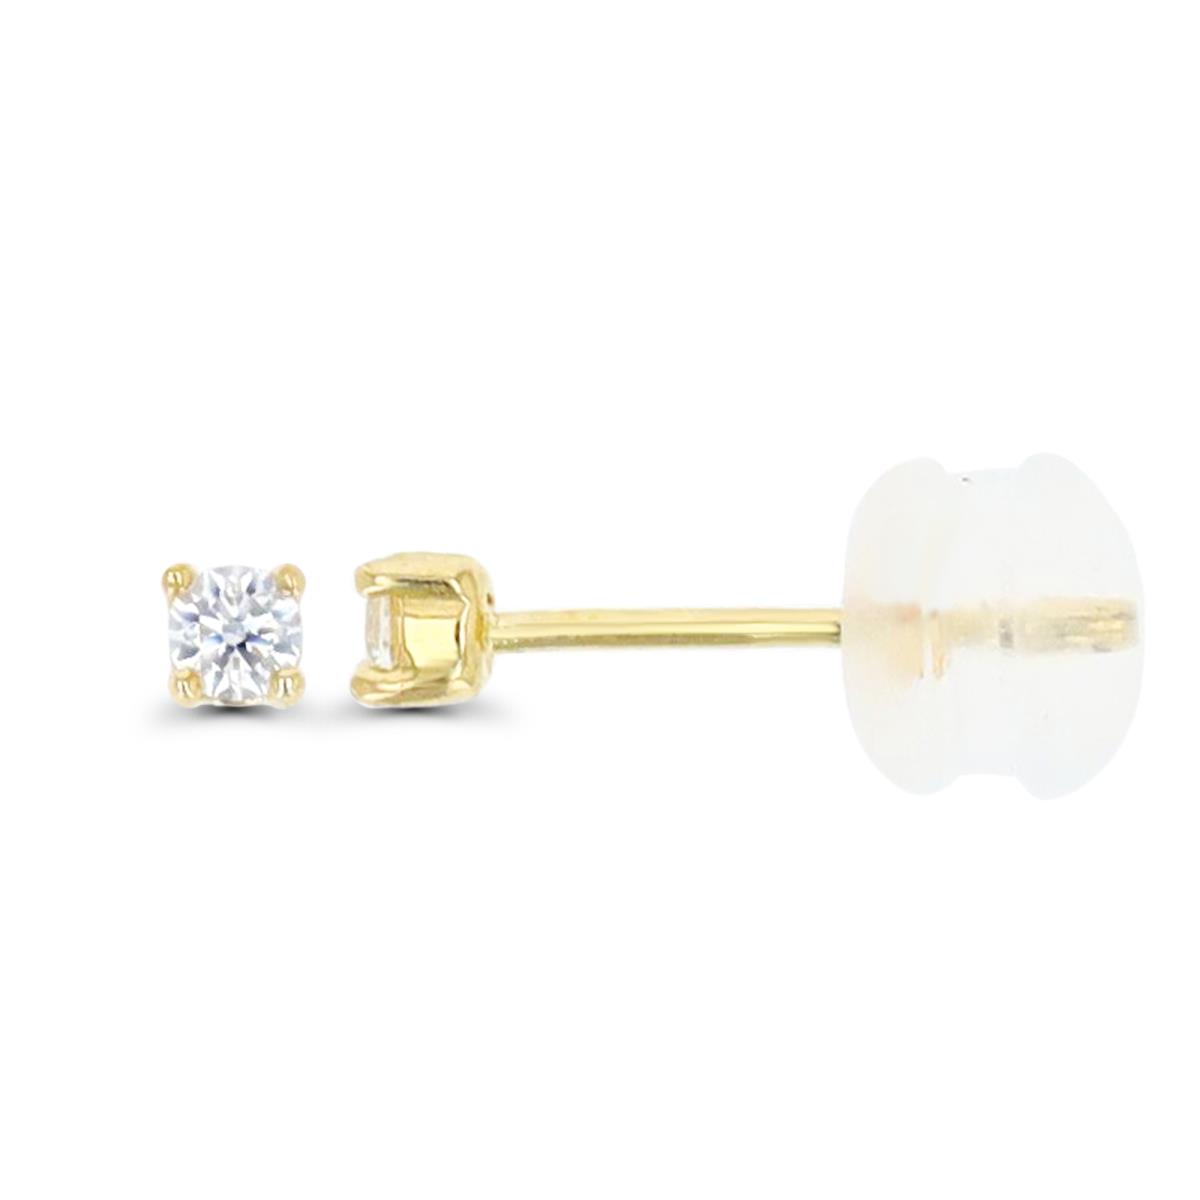 14K Yellow Gold 2.5mm White CZ Solitaire 2.5MM Stud Earring with Silicone Back